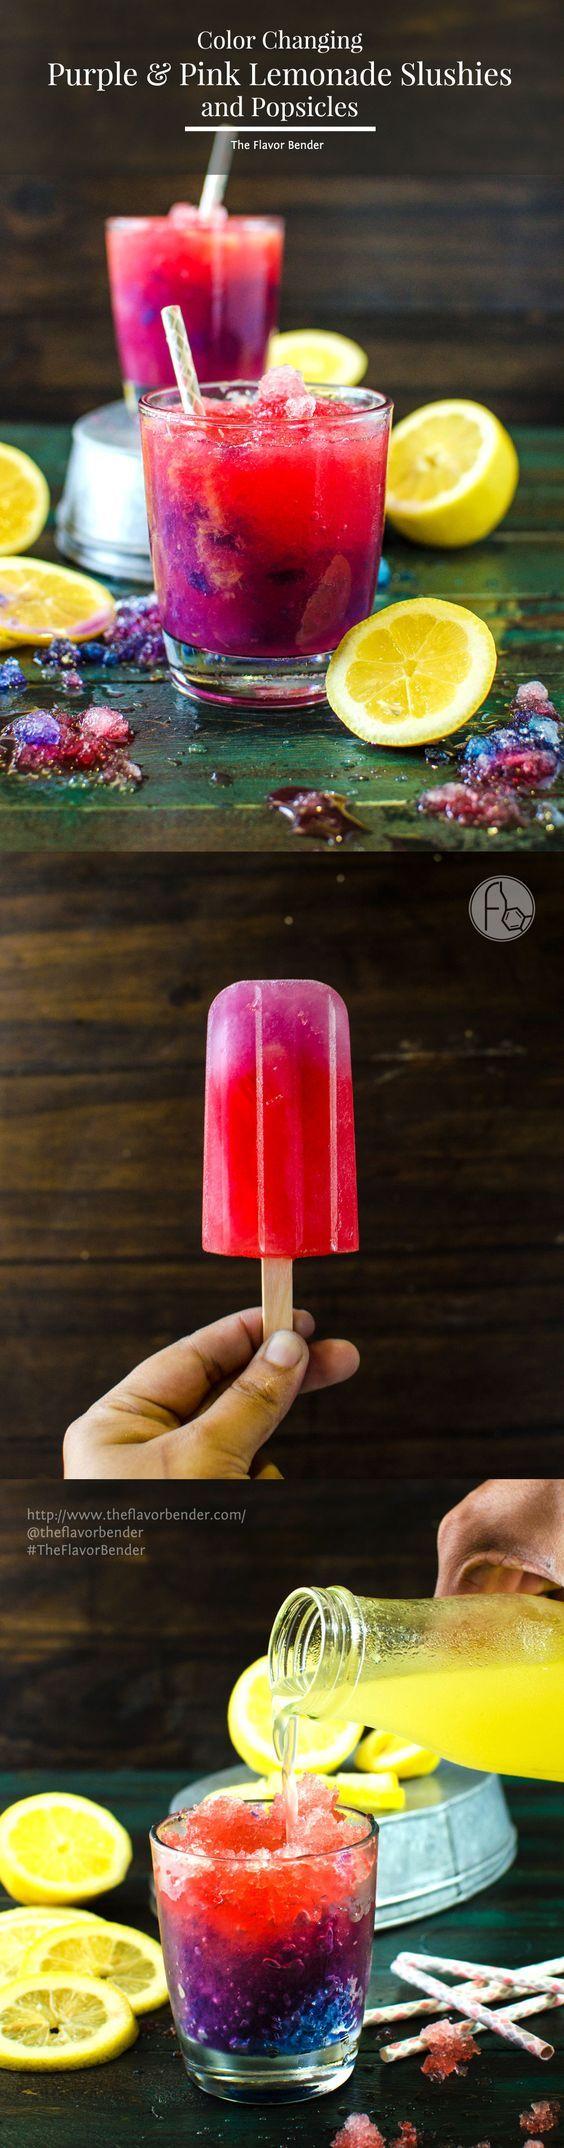 Hochzeit - Color Changing Purple And Pink Lemonade Slushies And Popsicles